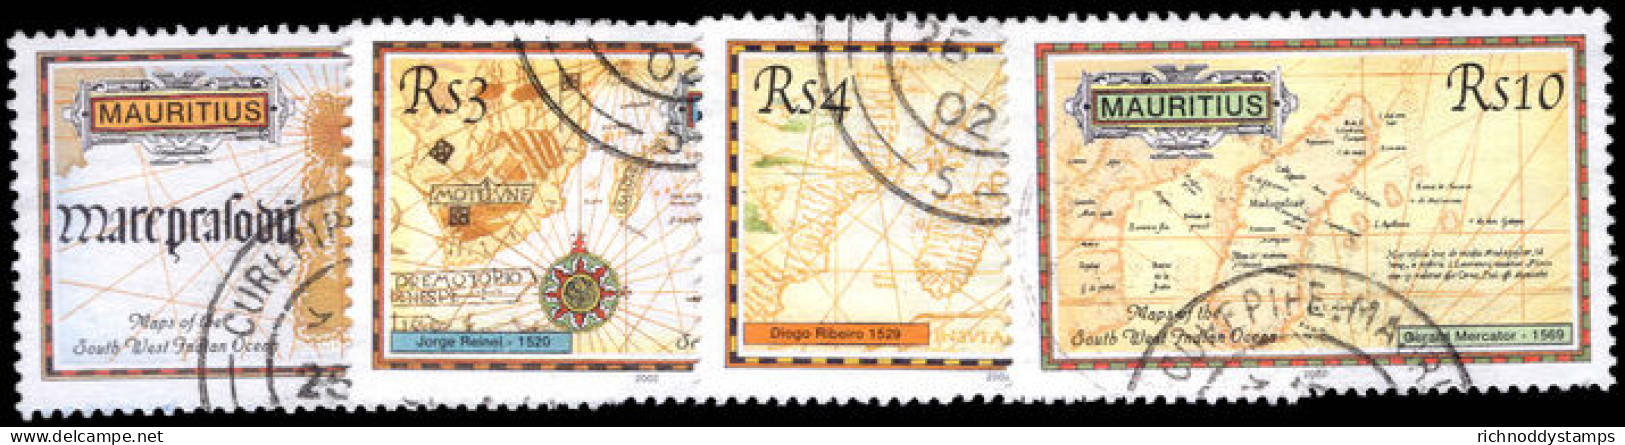 Mauritius 2002 16th Century Maps Of South-west Indian Ocean Fine Used. - Mauritius (1968-...)